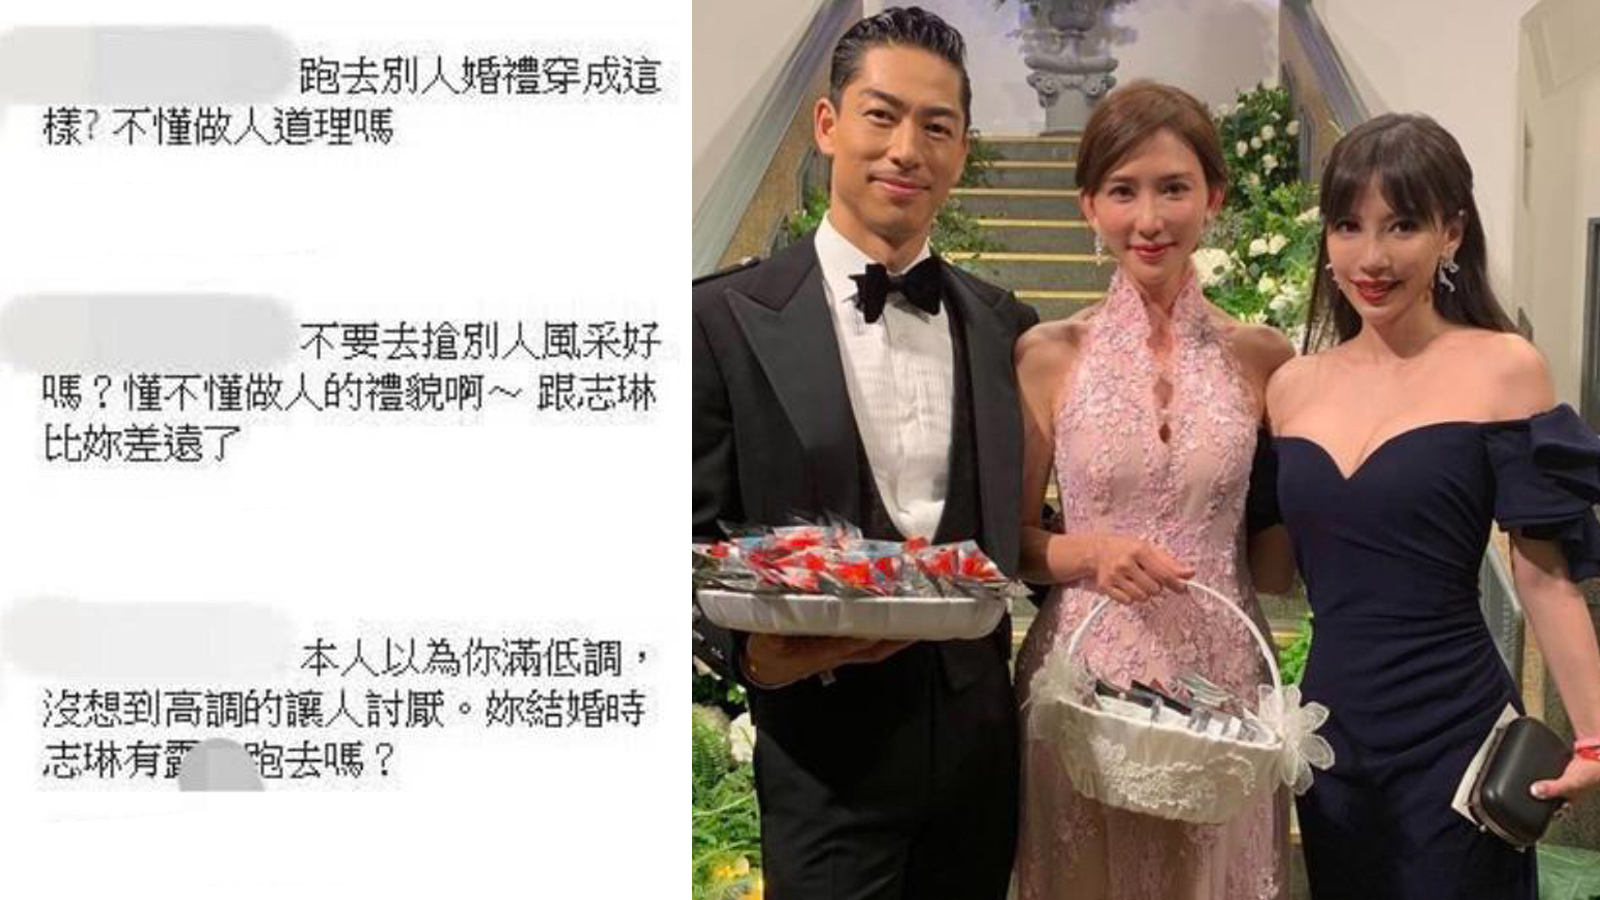 Wang Leehom's wife slammed for “showing off her cleavage” at Lin Chi-ling's  wedding - 8days